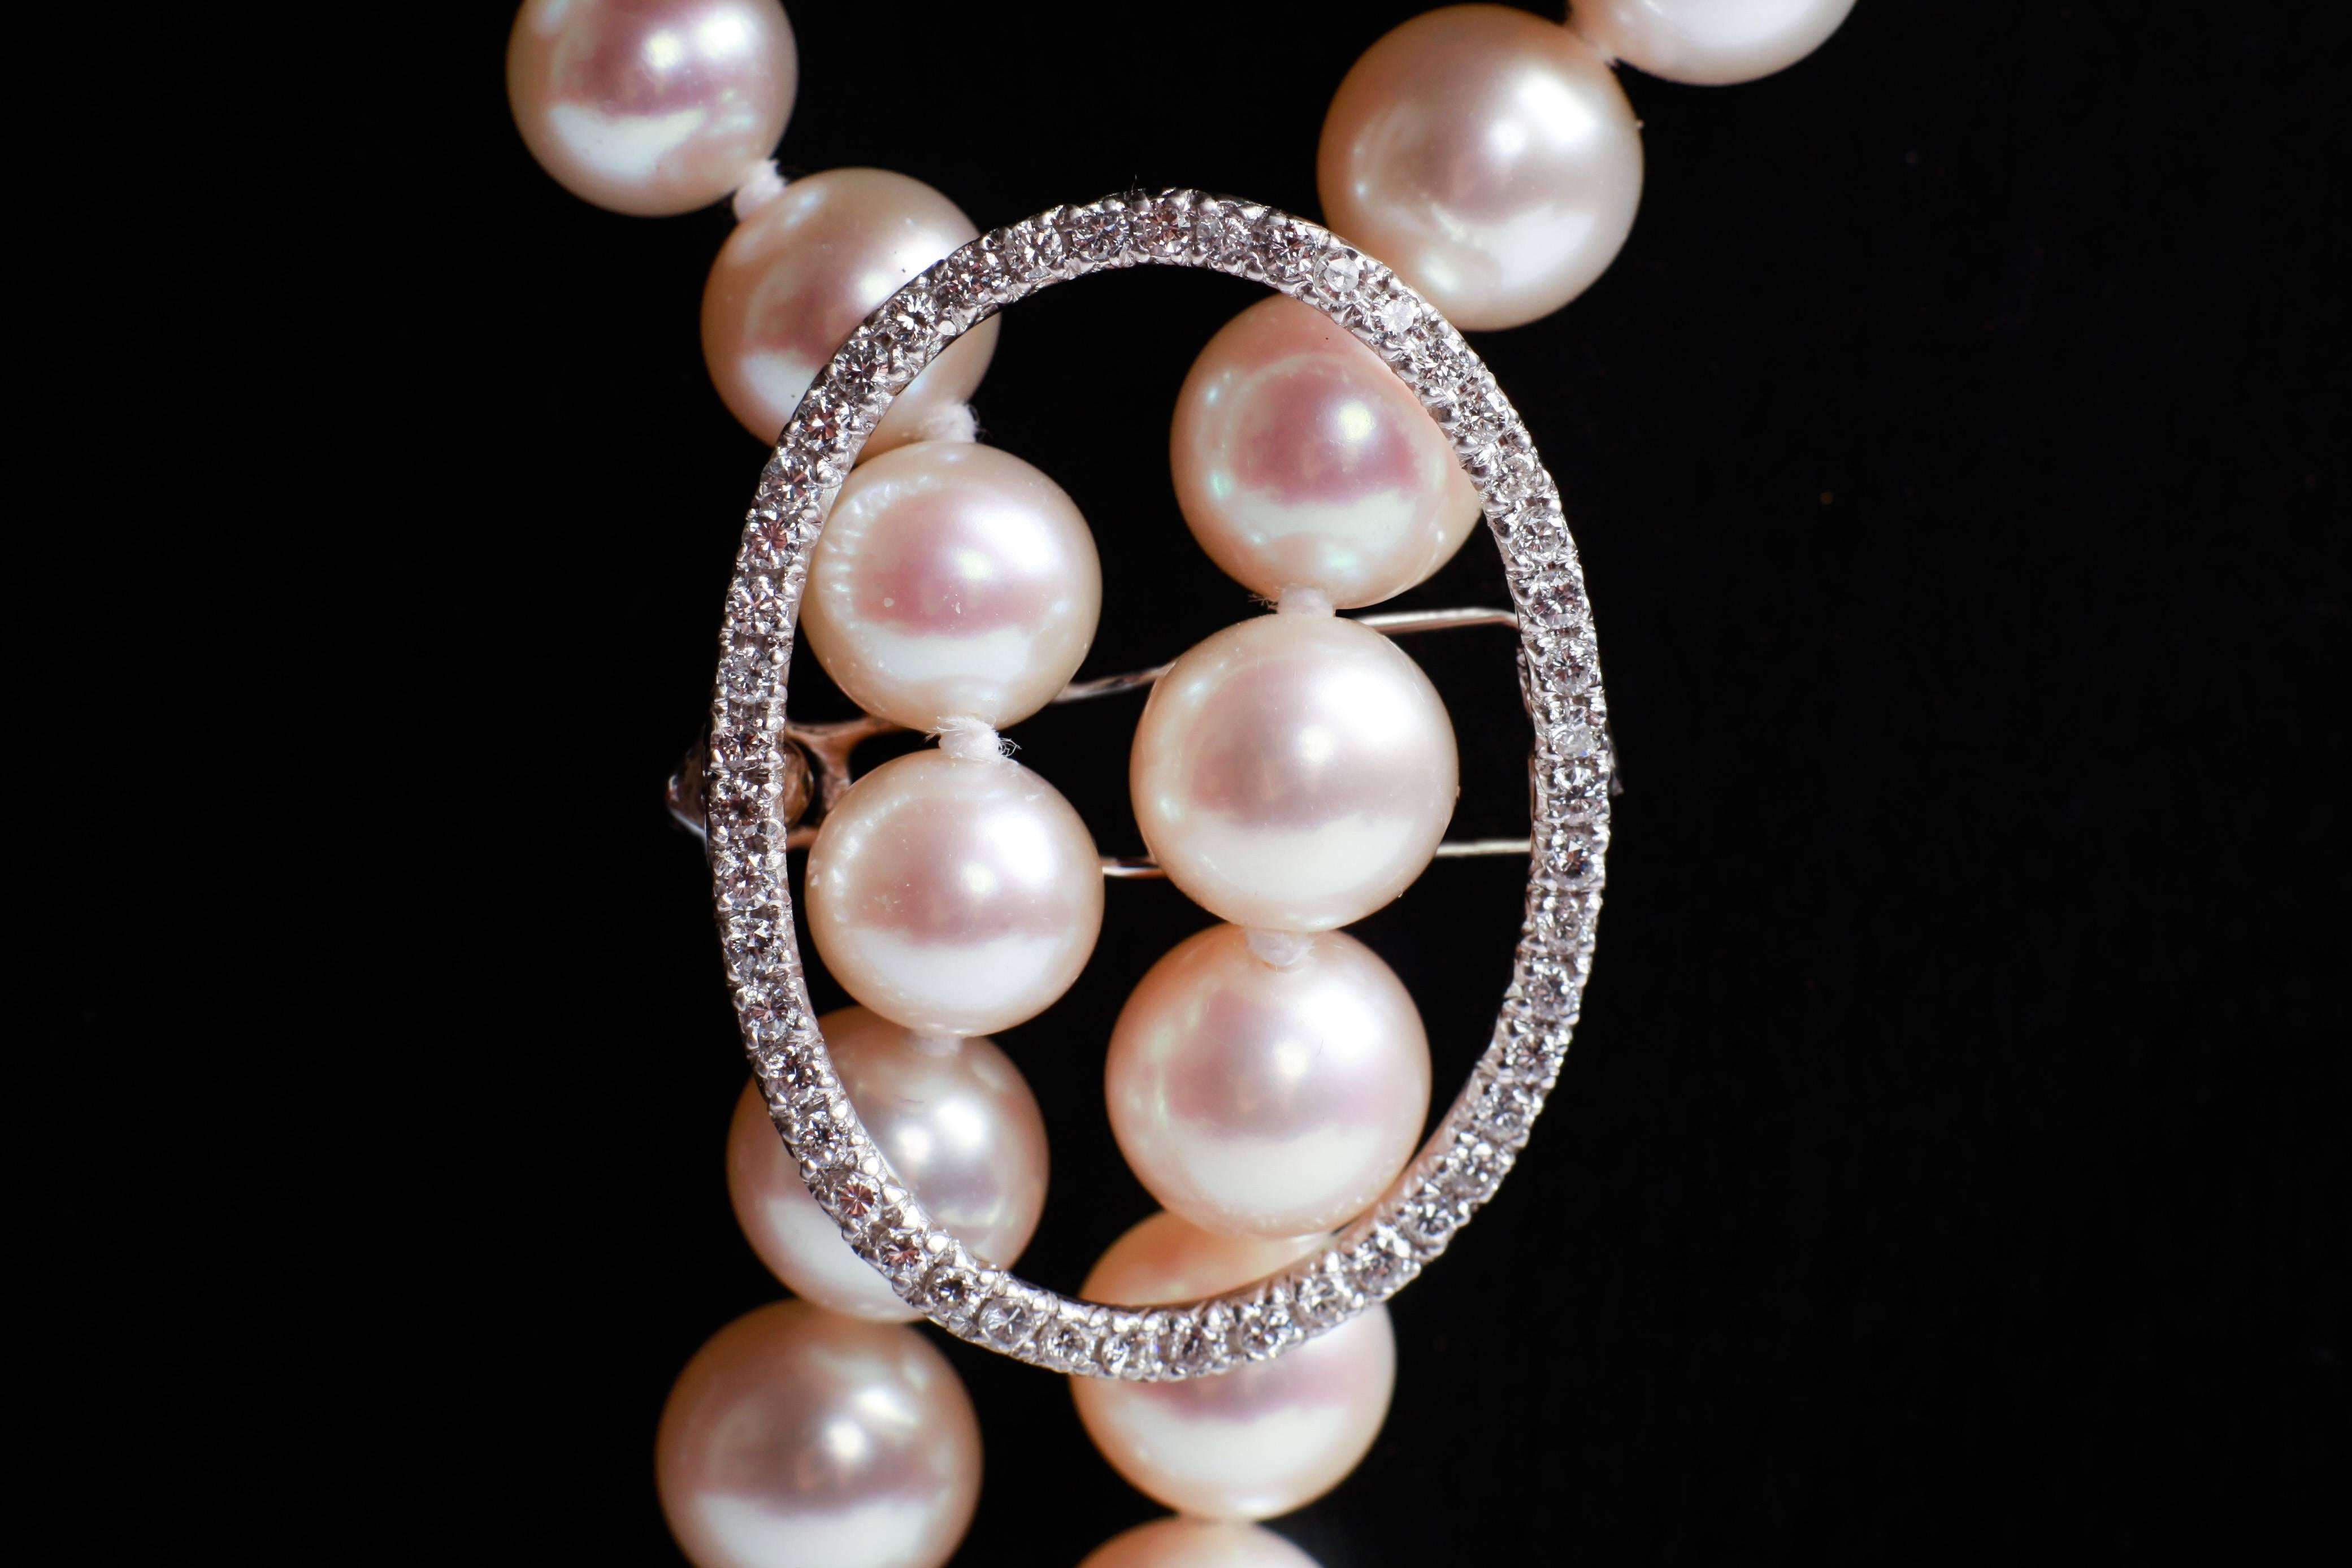 Contemporary Marion Jeantet Elegant Long Necklace of White Pearls and Diamonds 